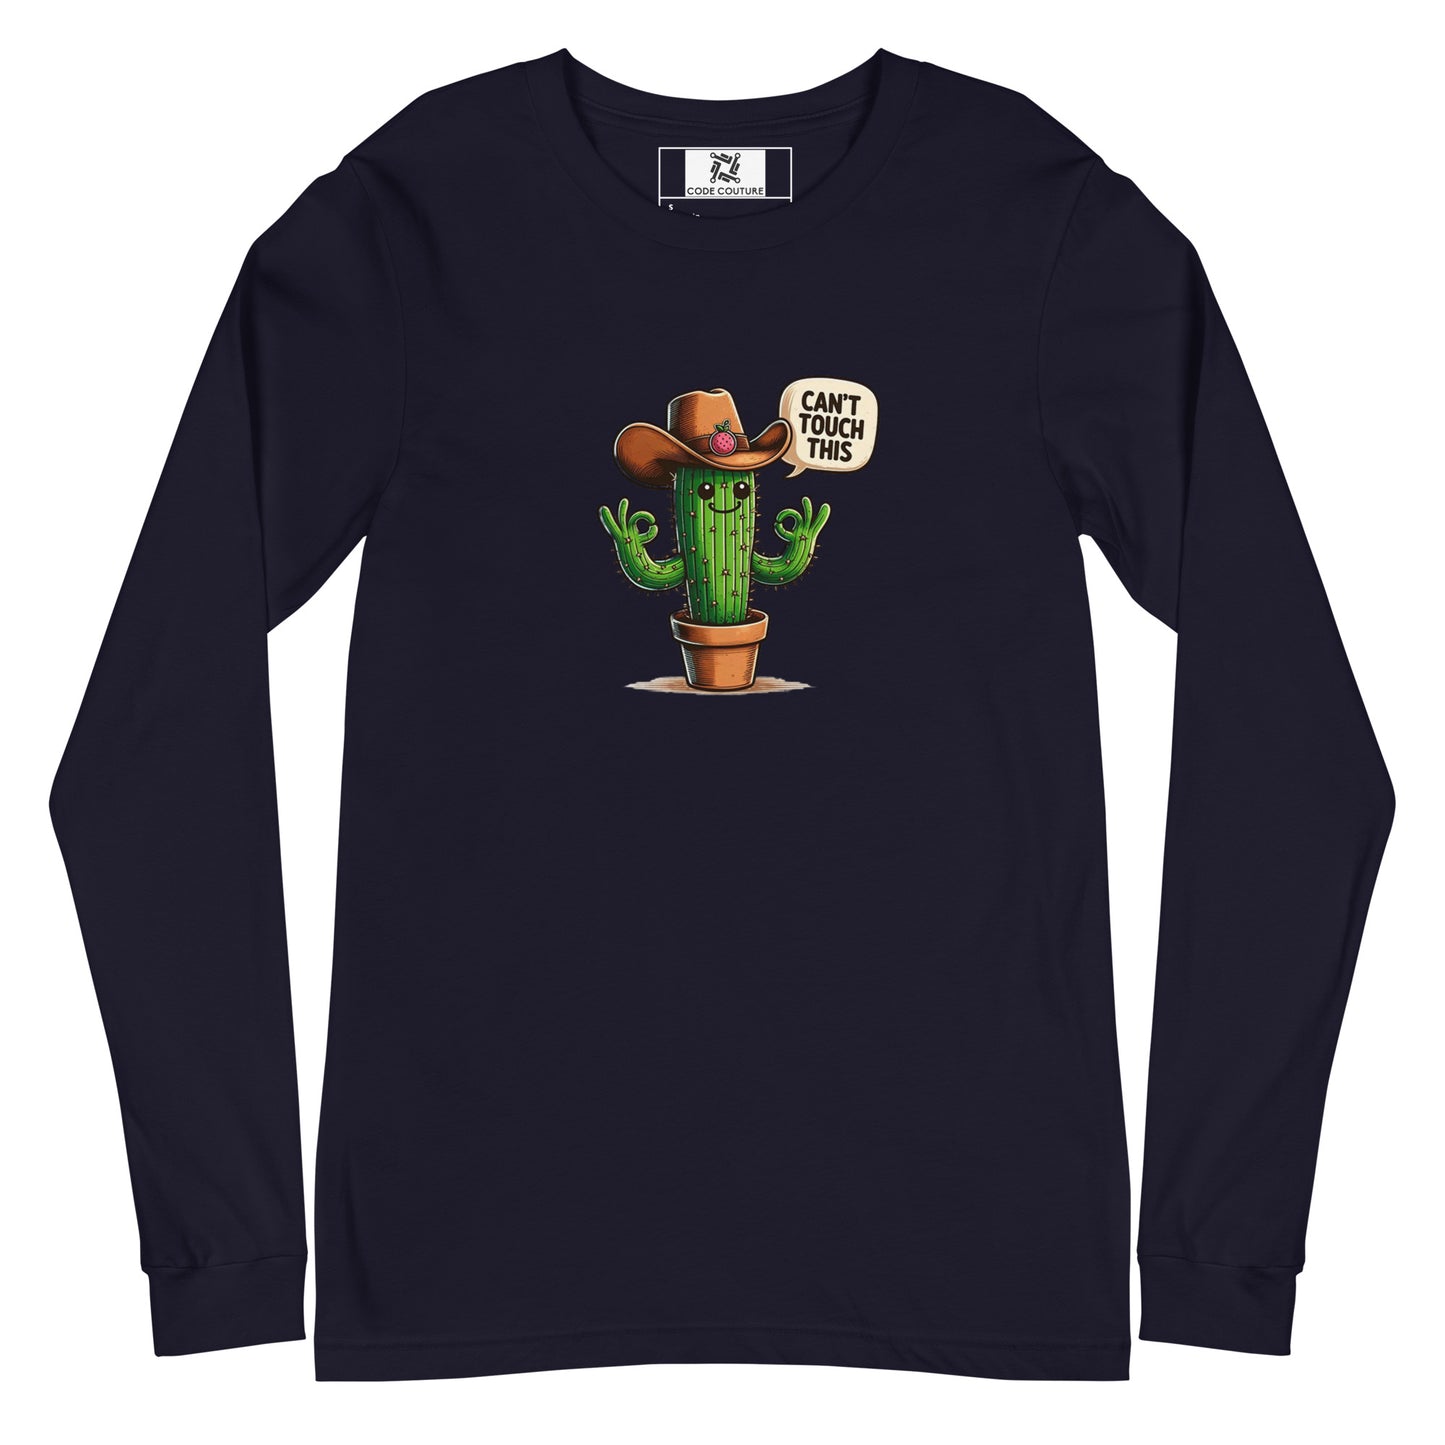 Can't Touch This Long Sleeve - Dark